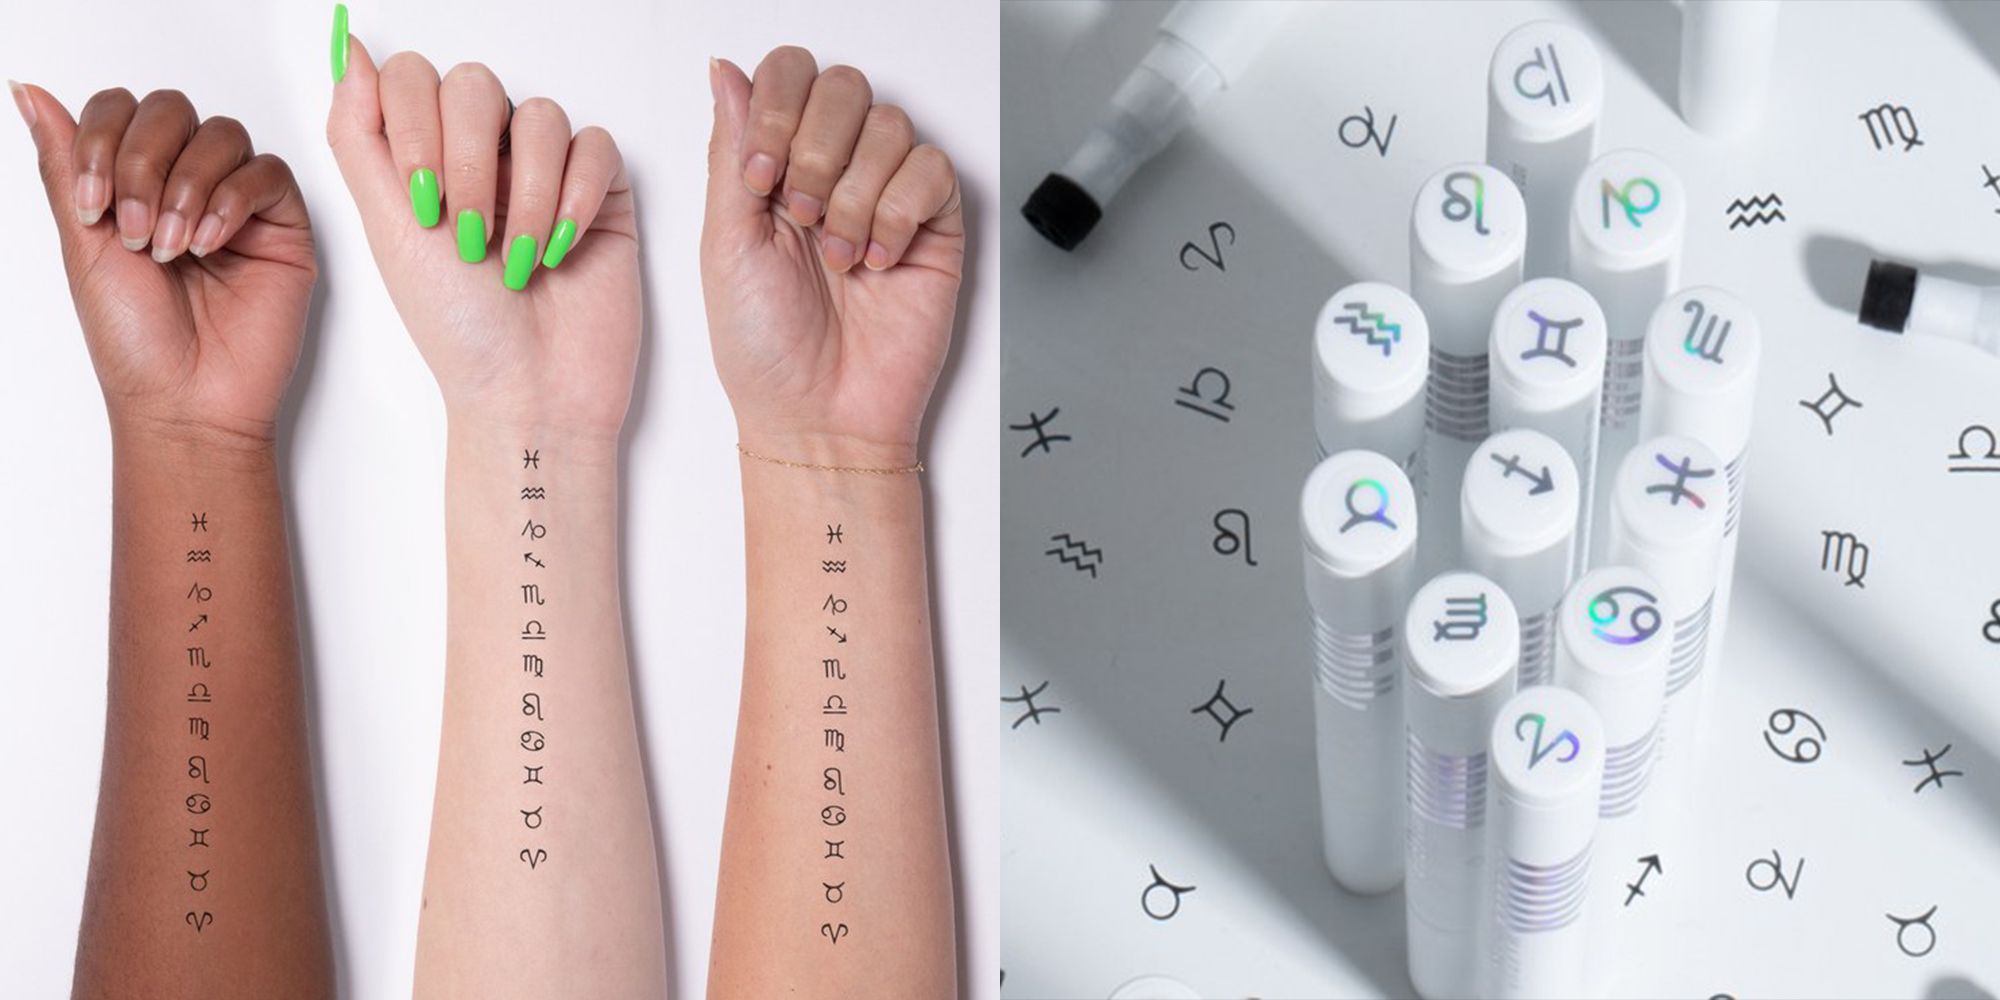 Milk Makeup's New Tattoo Stamp Matches Your Zodiac Sign-Makeup That Matches Your Horoscope